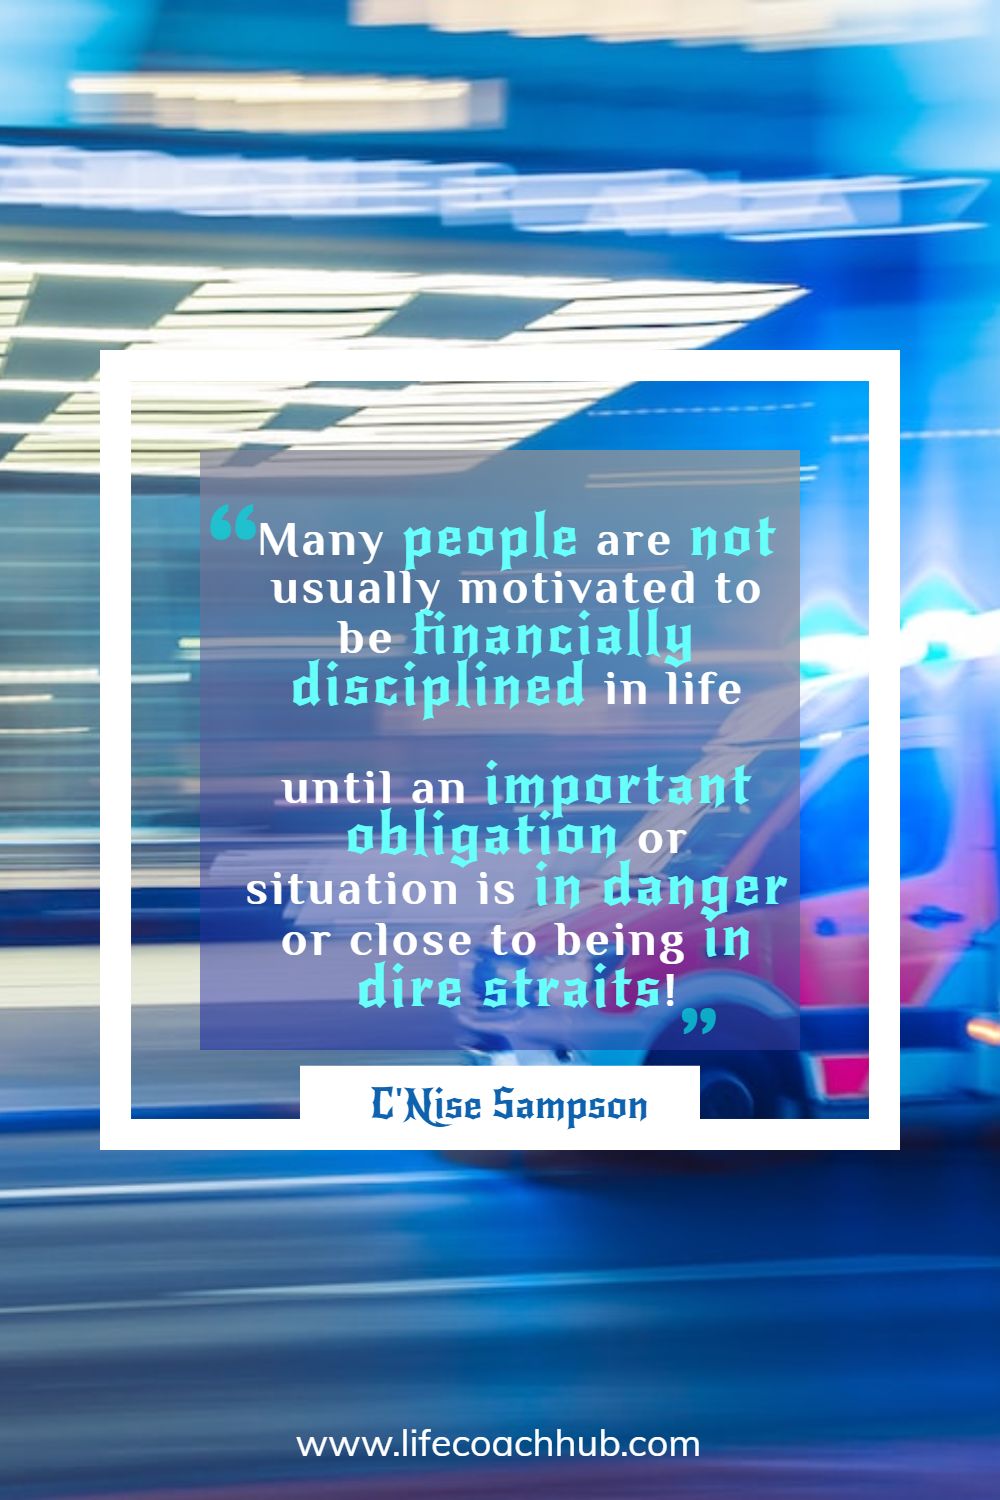 Many people are not usually motivated to be financially disciplined in life until an important obligation or situation is in danger or close to being in dire straits! C'Nise Sampson Coaching Quote